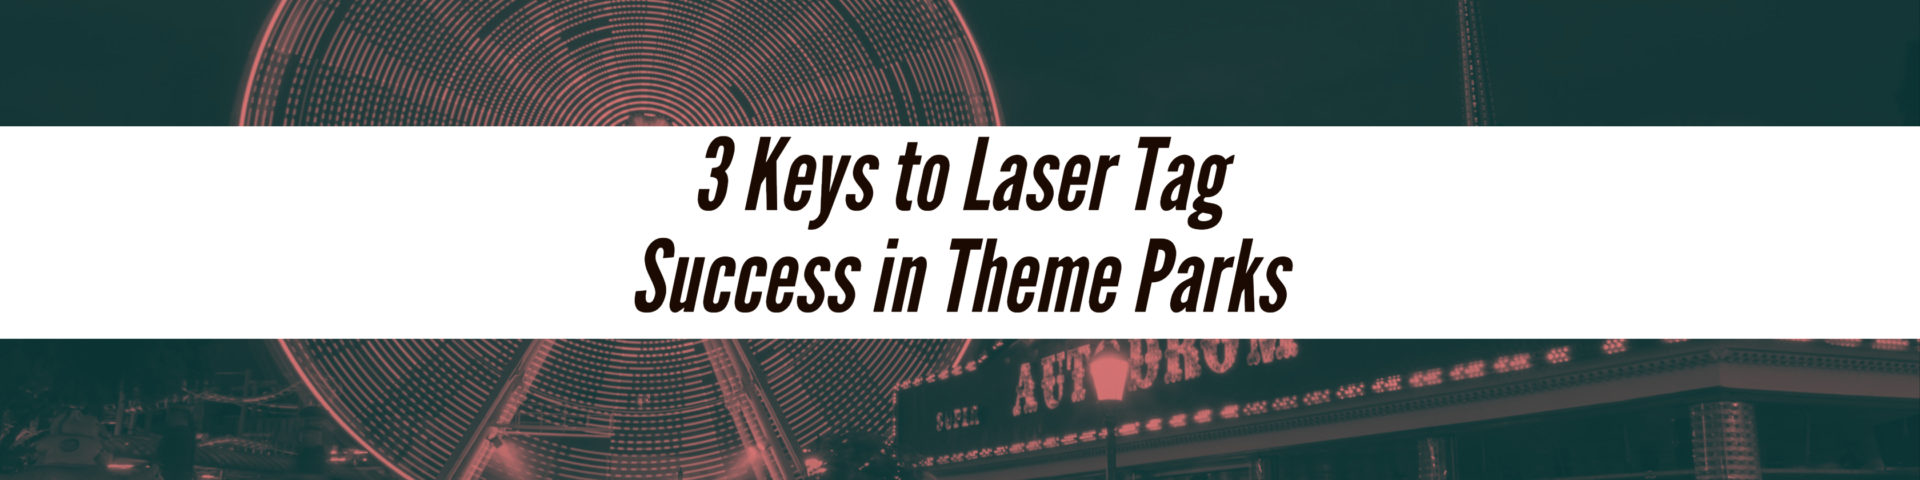 3 Keys to Laser Tag Success in Theme Parks